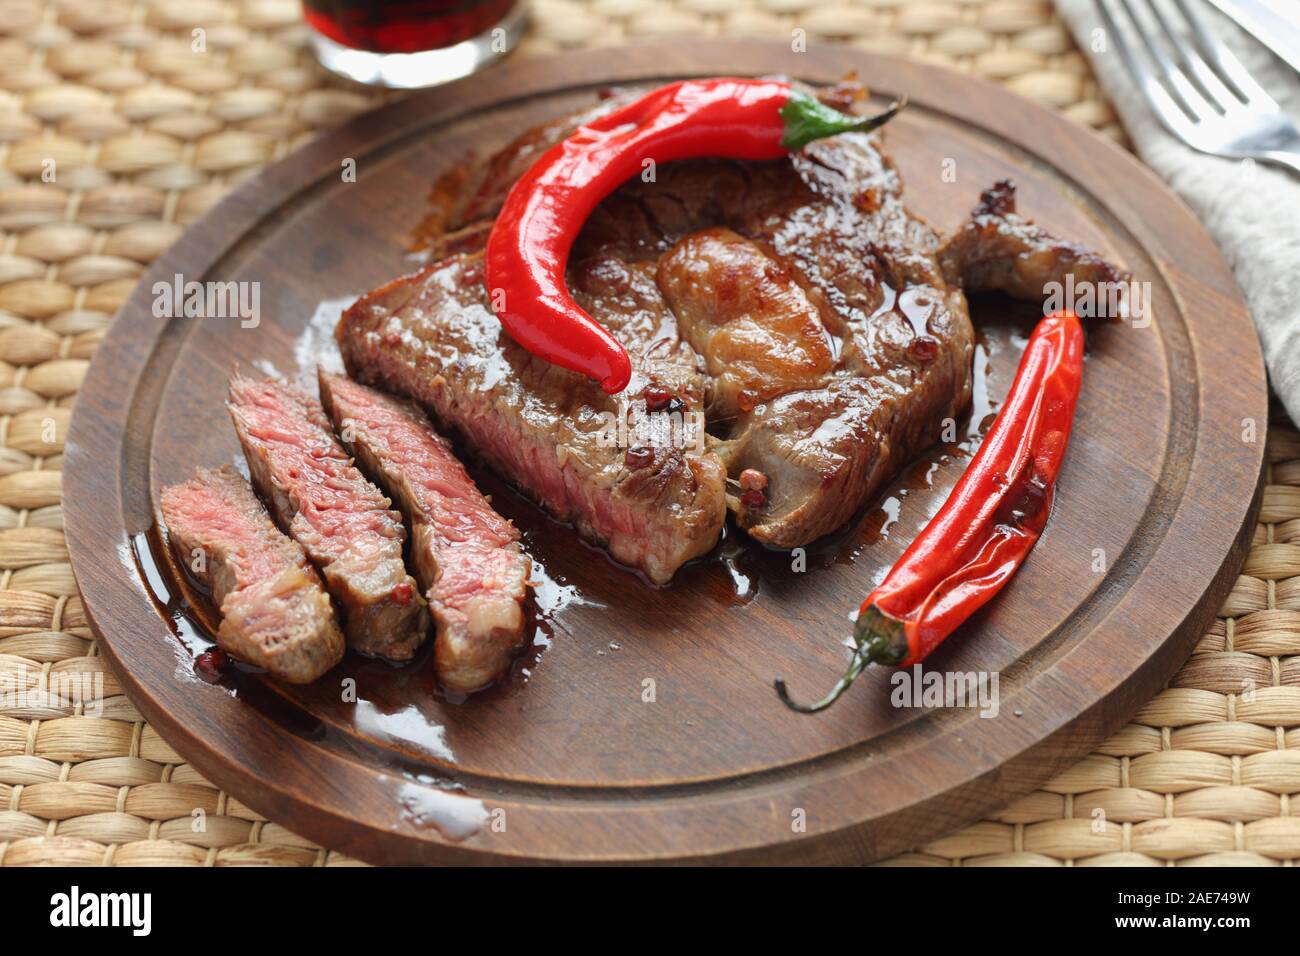 Sliced medium rare beef steak topped with roasted chili pepper on a wooden cutting board Stock Photo